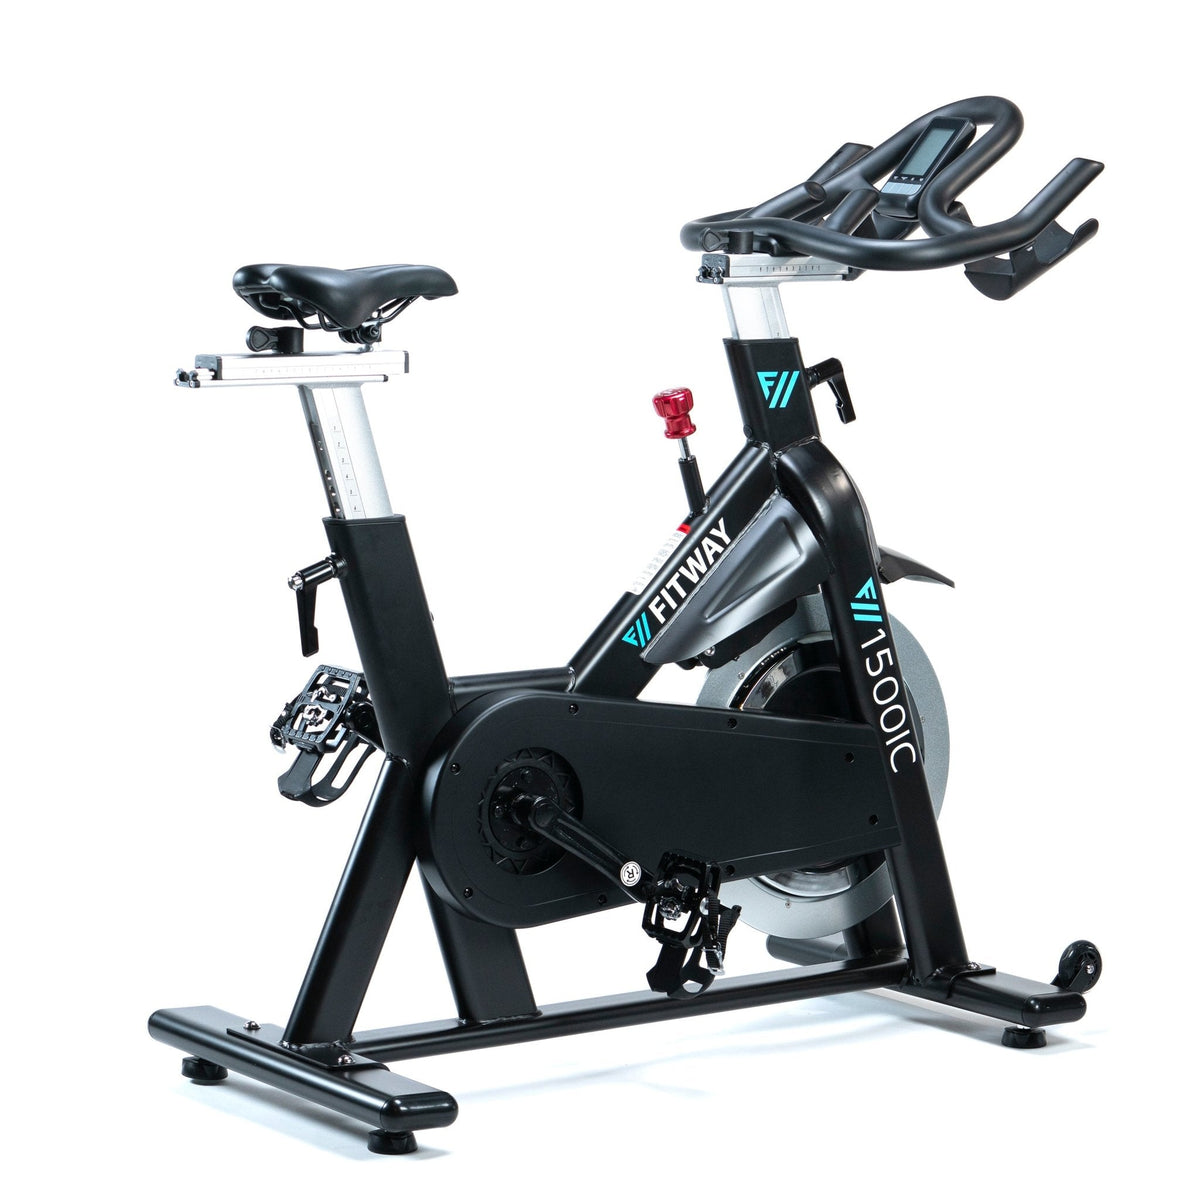 FitWay Equip. 1500IC Indoor Cycle - Angle 5